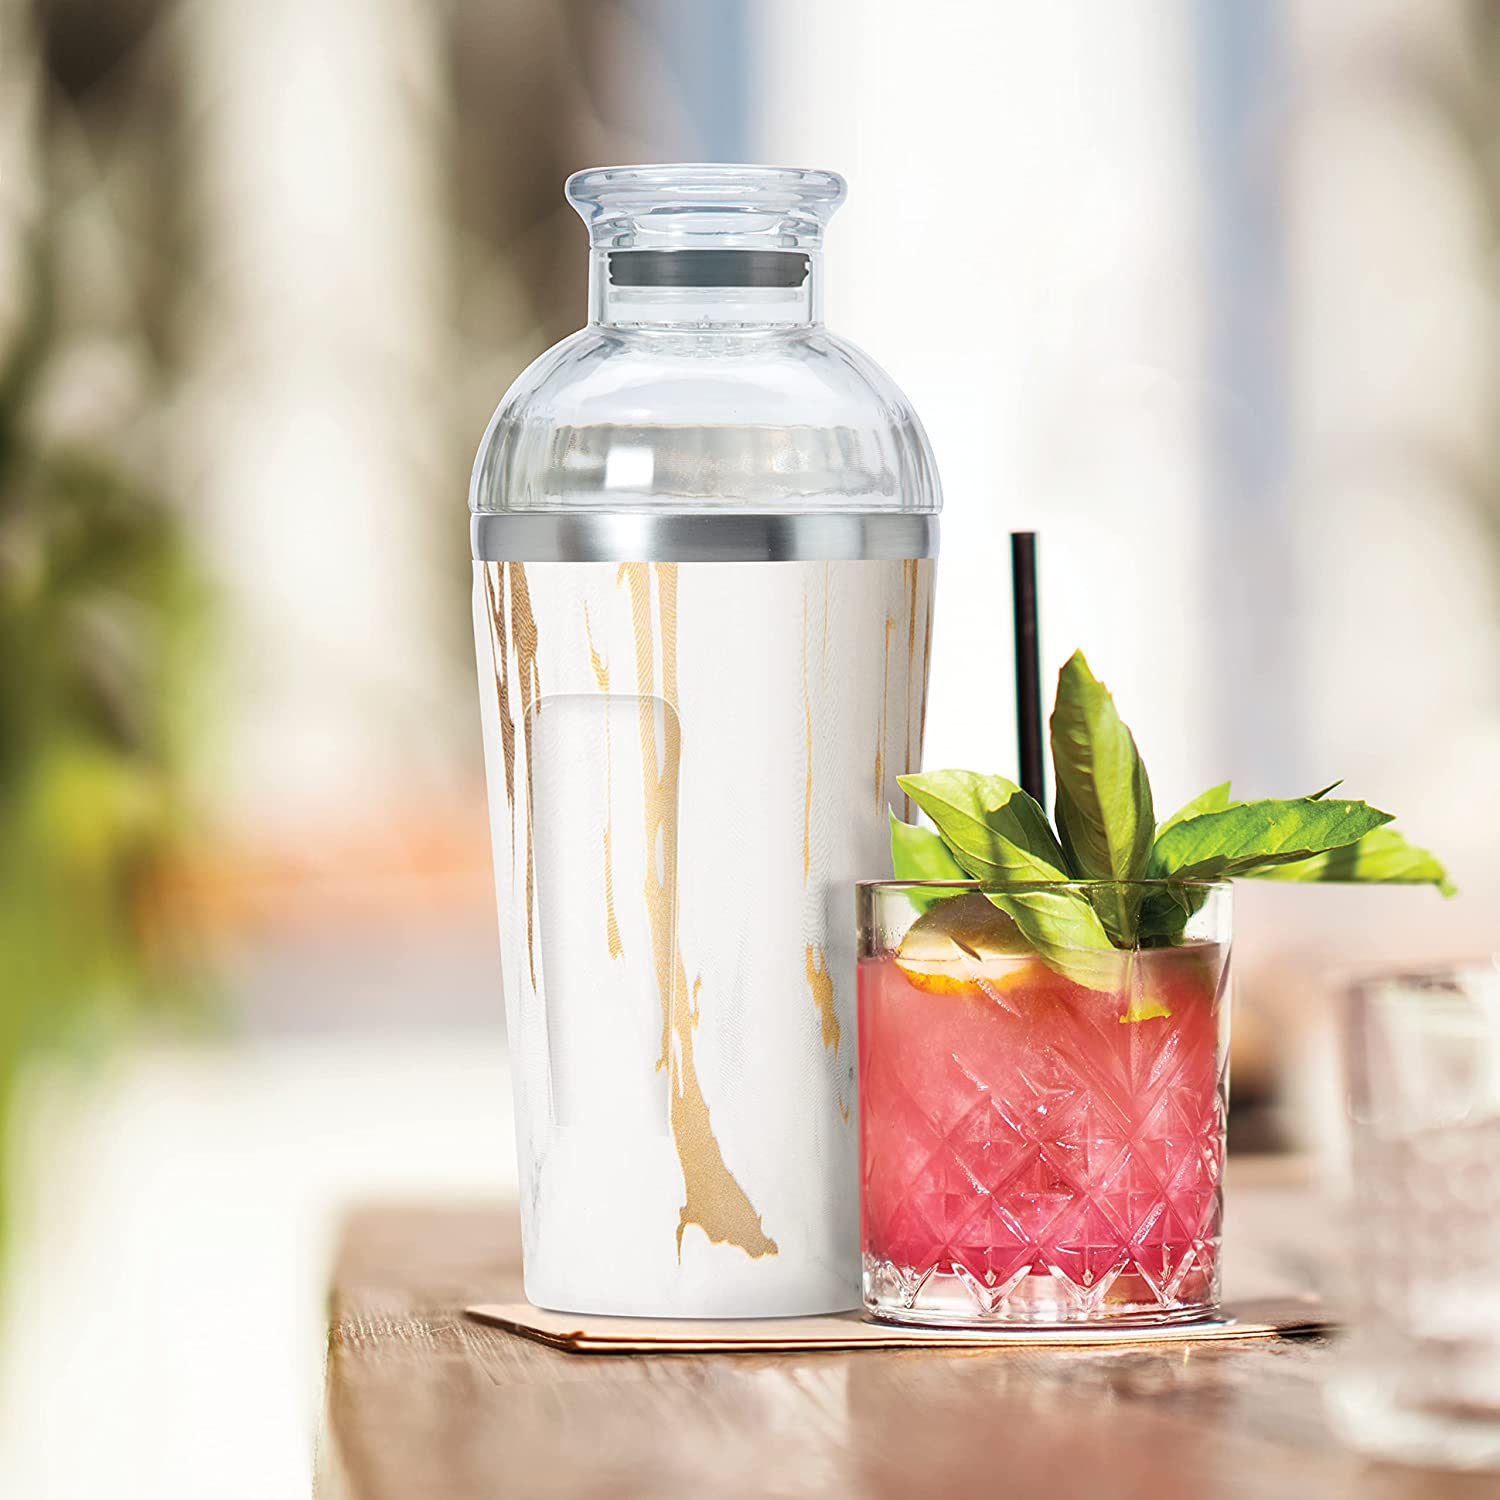 cocktail shaker set on a table with a pink cocktail that has a leafy garnish.